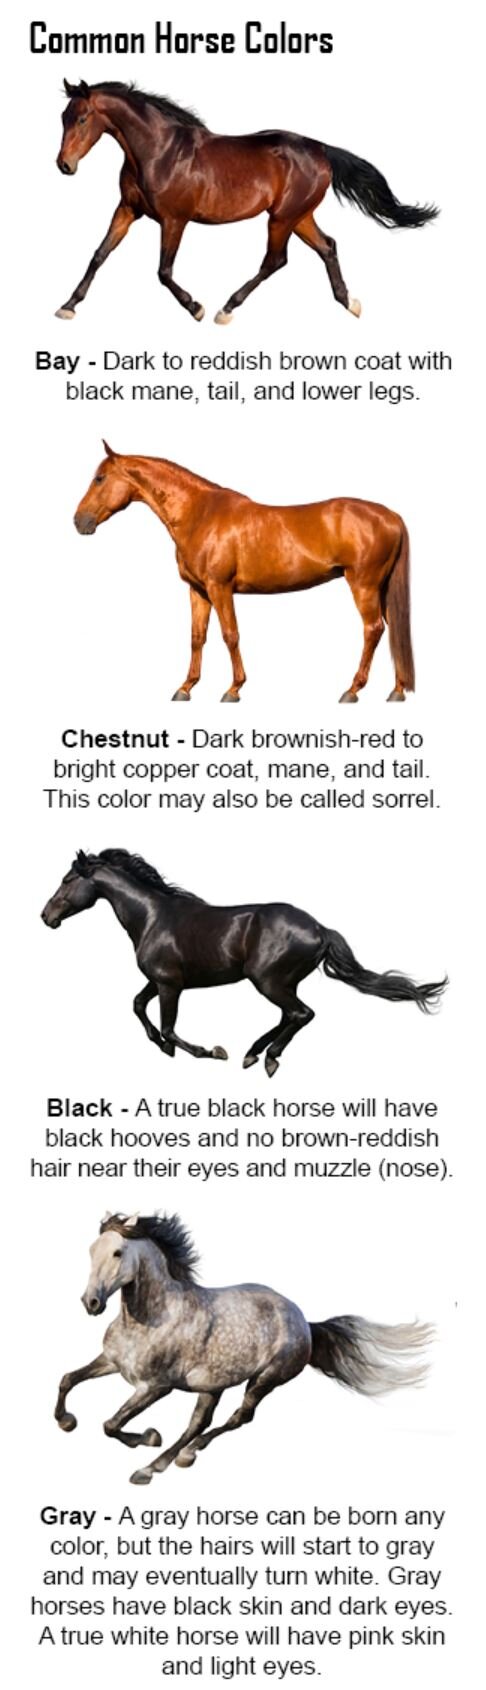 Horse Coat Color and Camouflages — #TeachKyAg